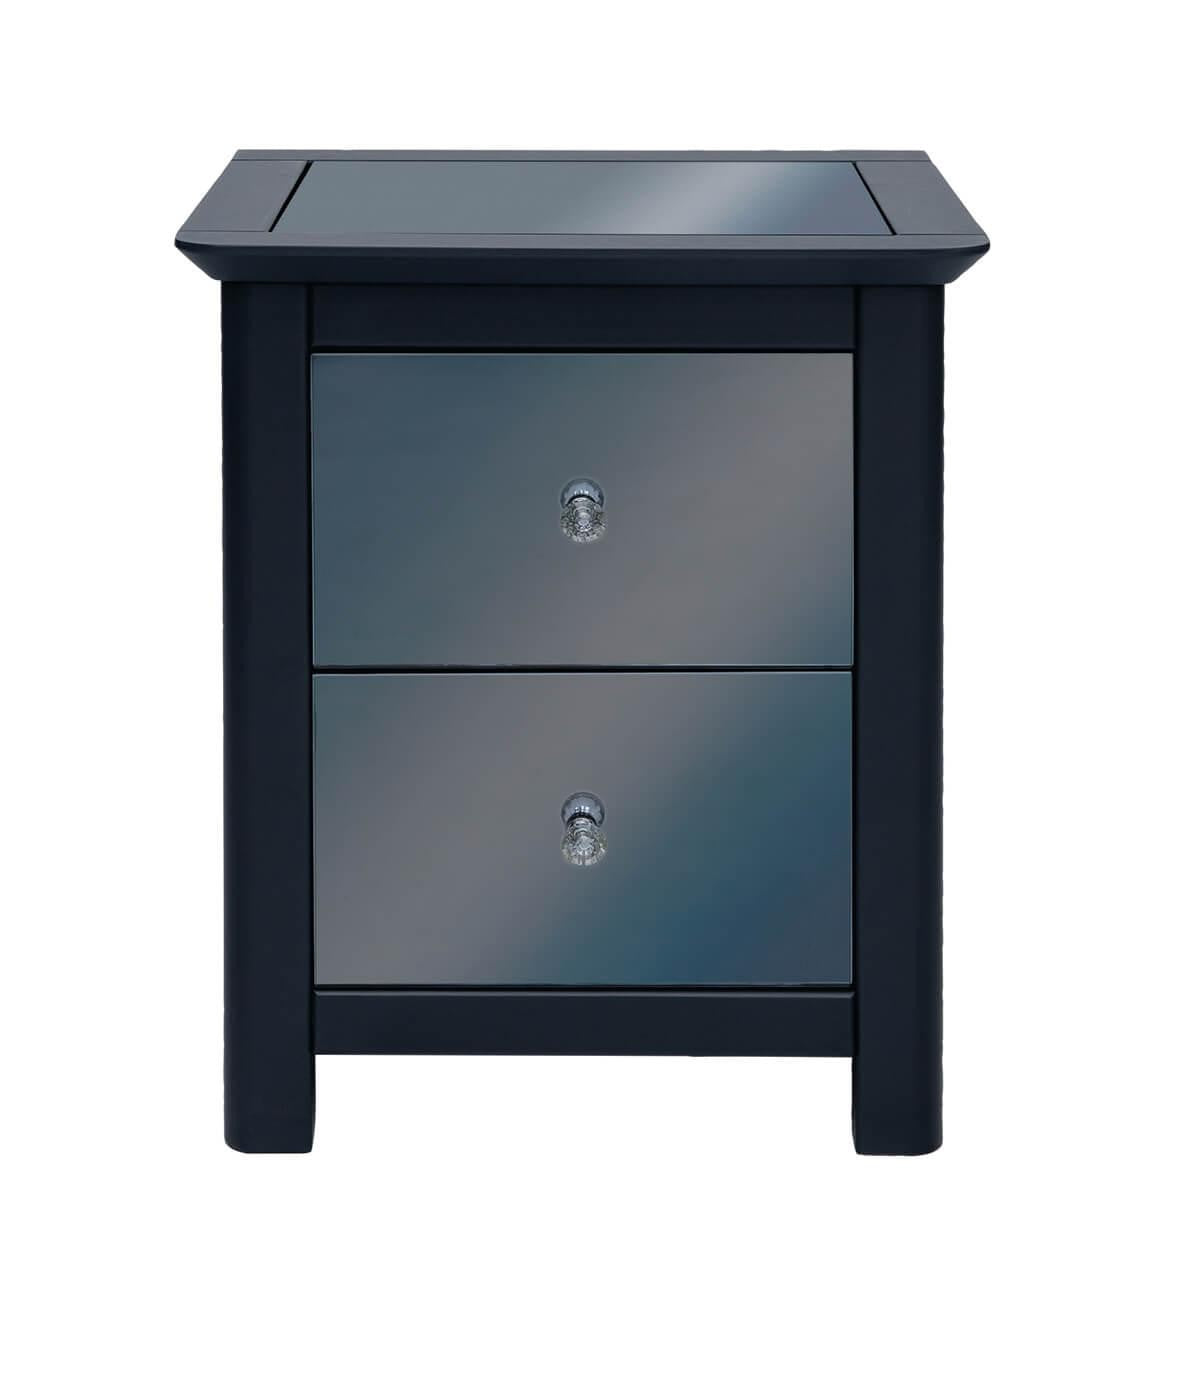 Core Products Ayr 2 Drawer Bedside Cabinet